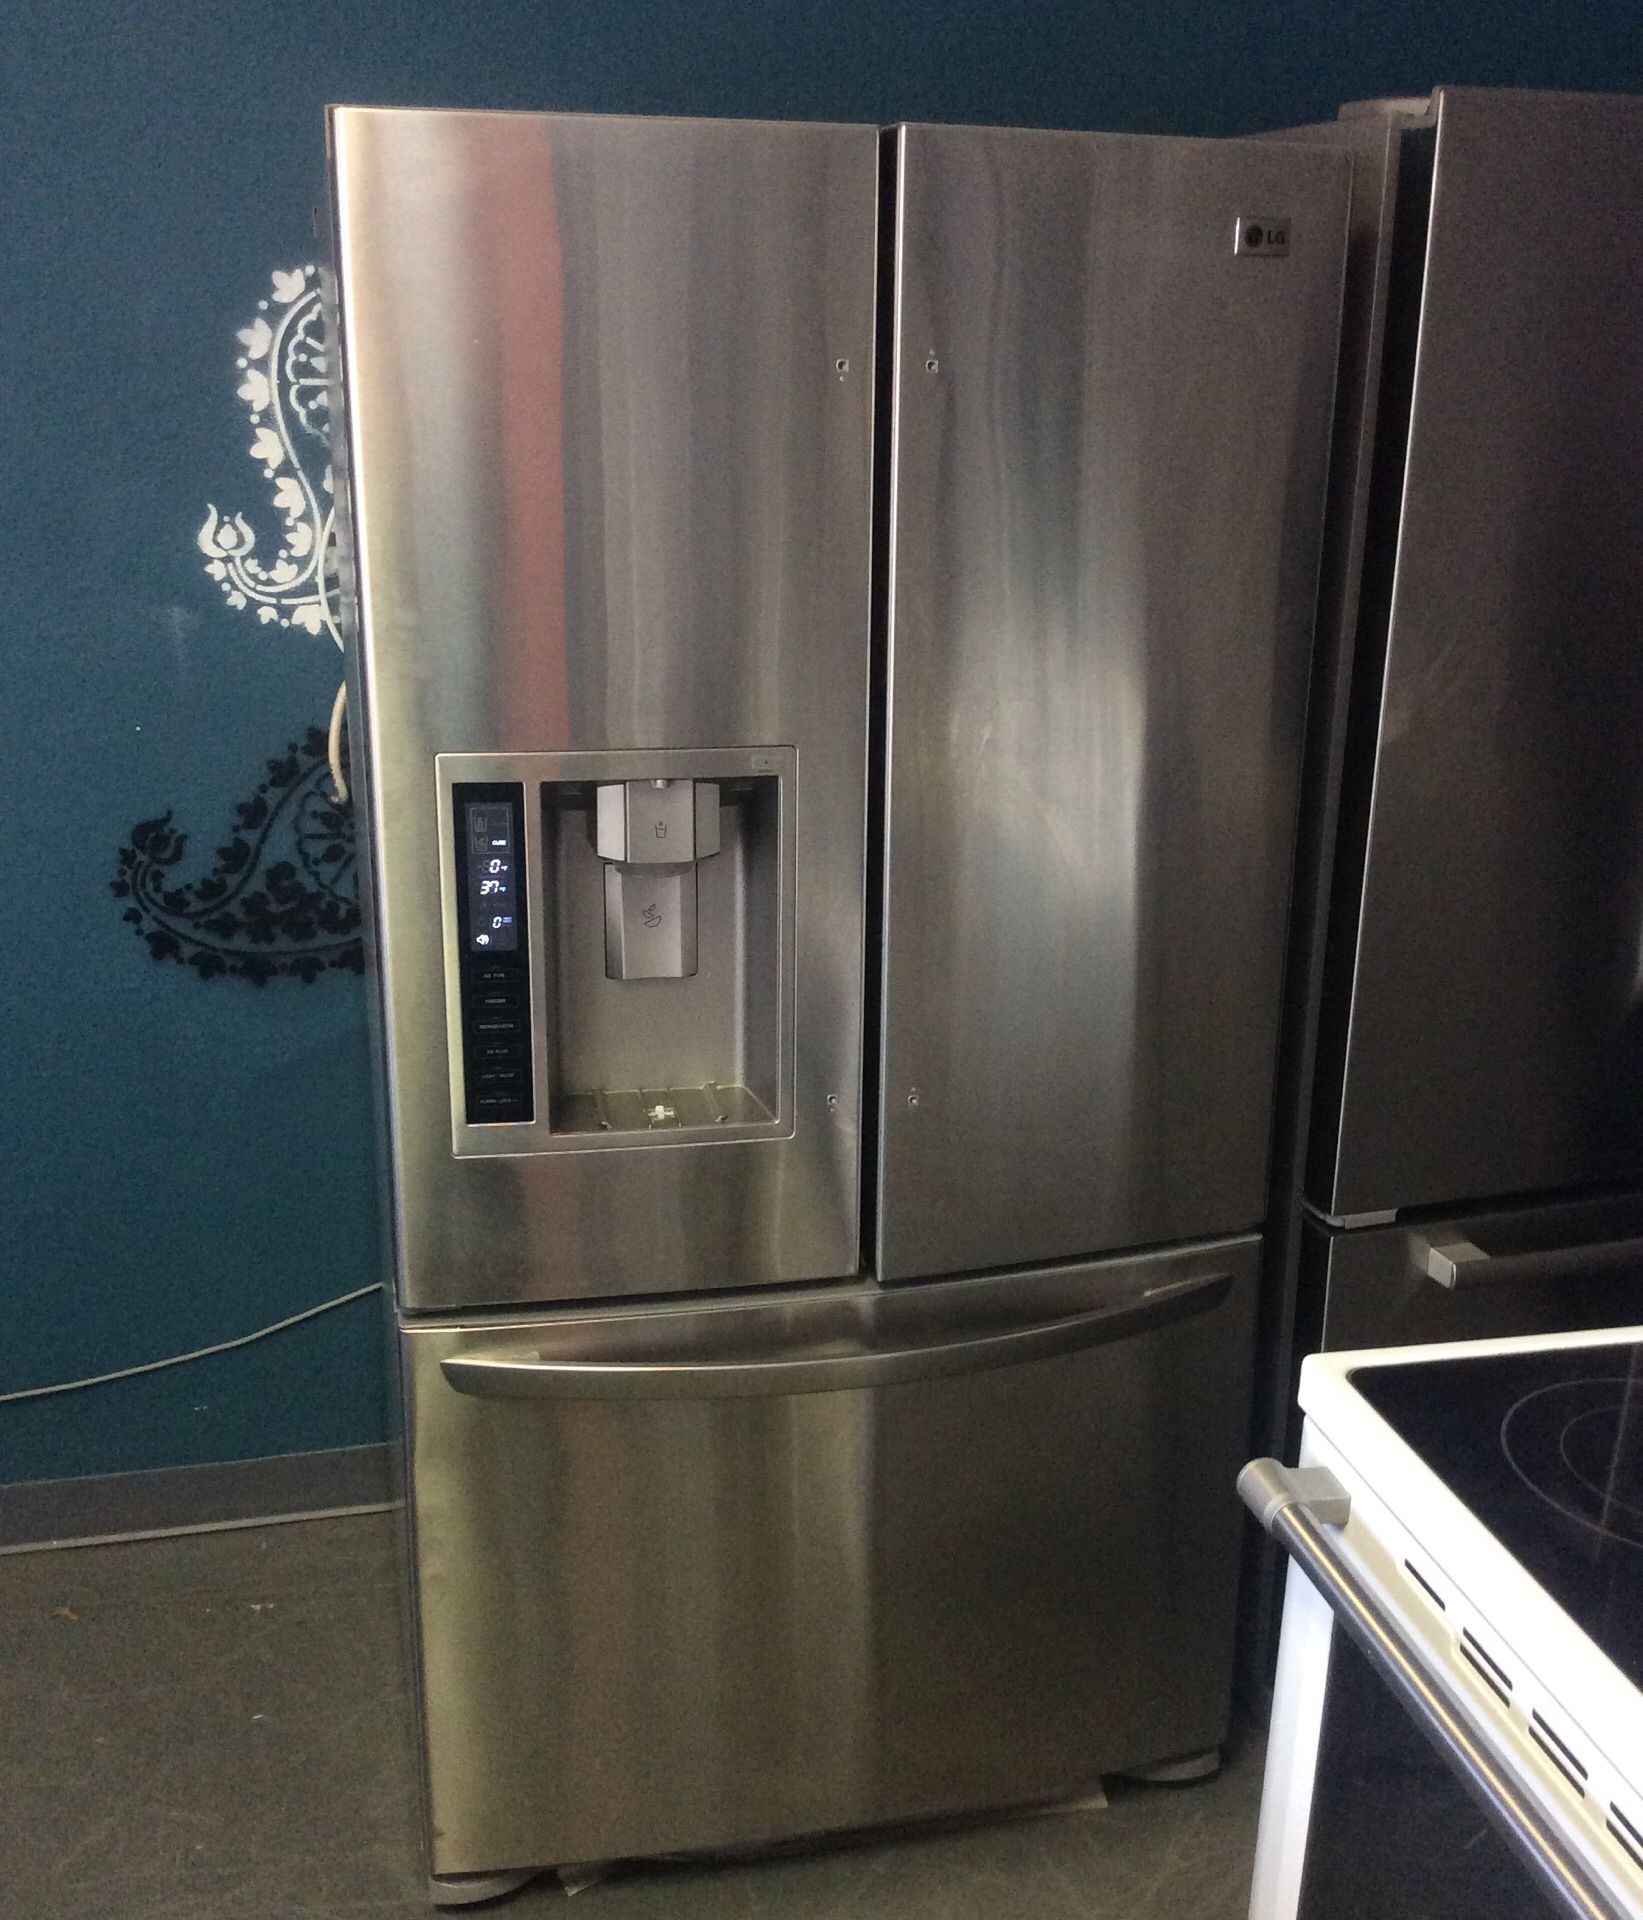 LG stainless steel French door refrigerator